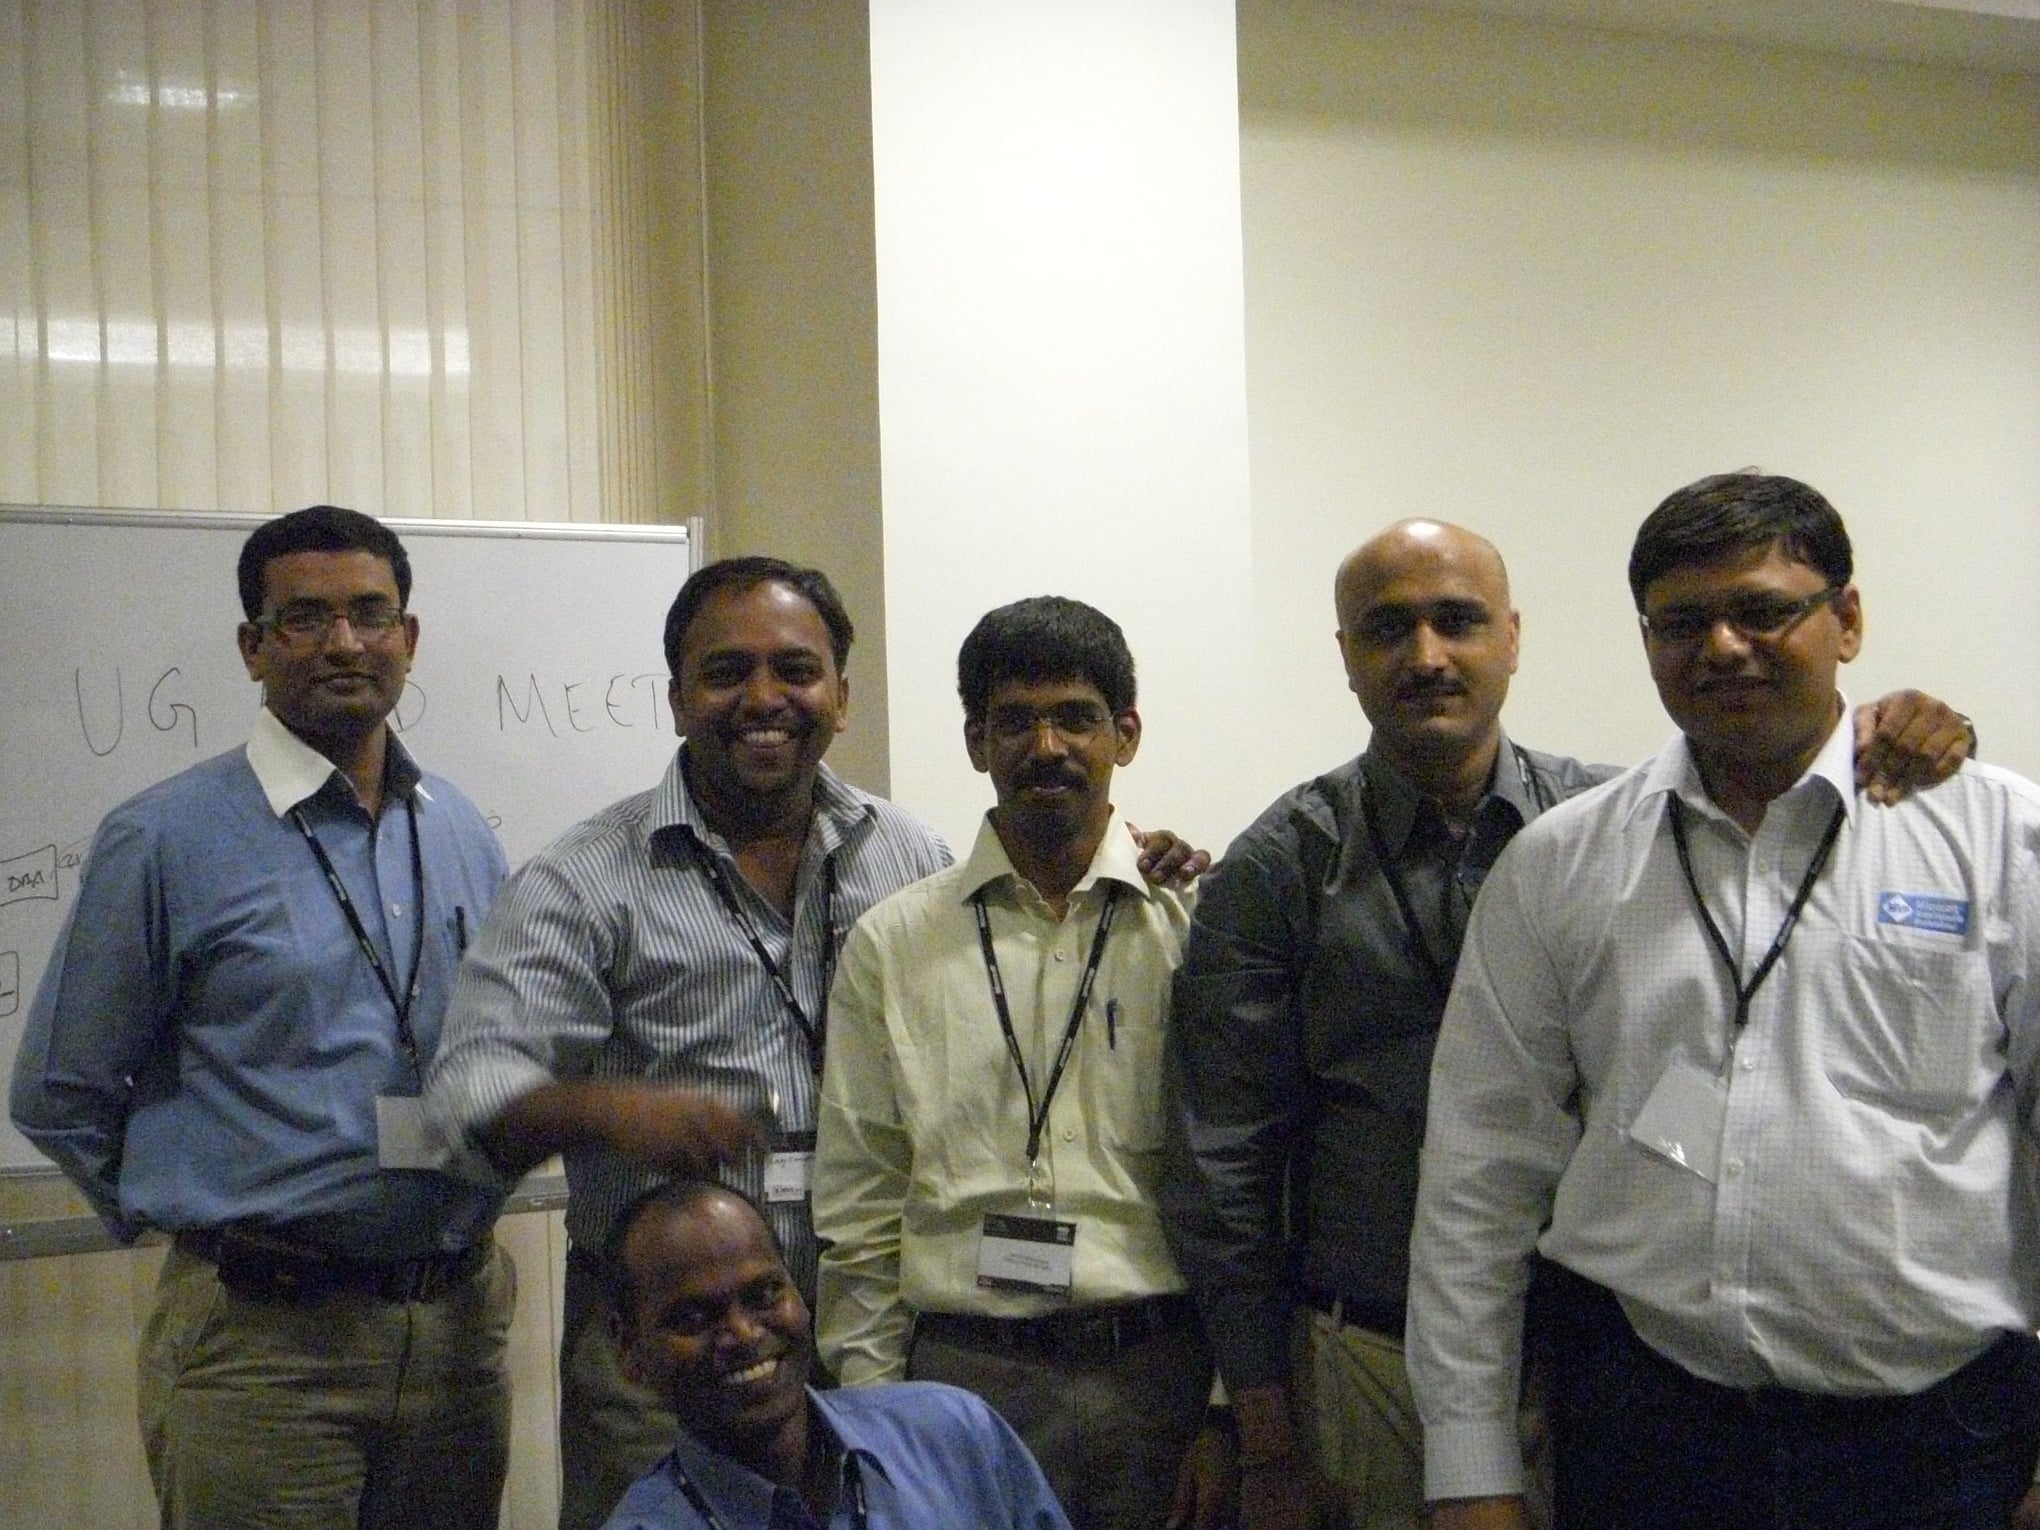 Team Positron Invitee at Teched By Microsoft with MVP and SQL Server Experts Pinal Dave Jacob Sebastian Surendra Mishra